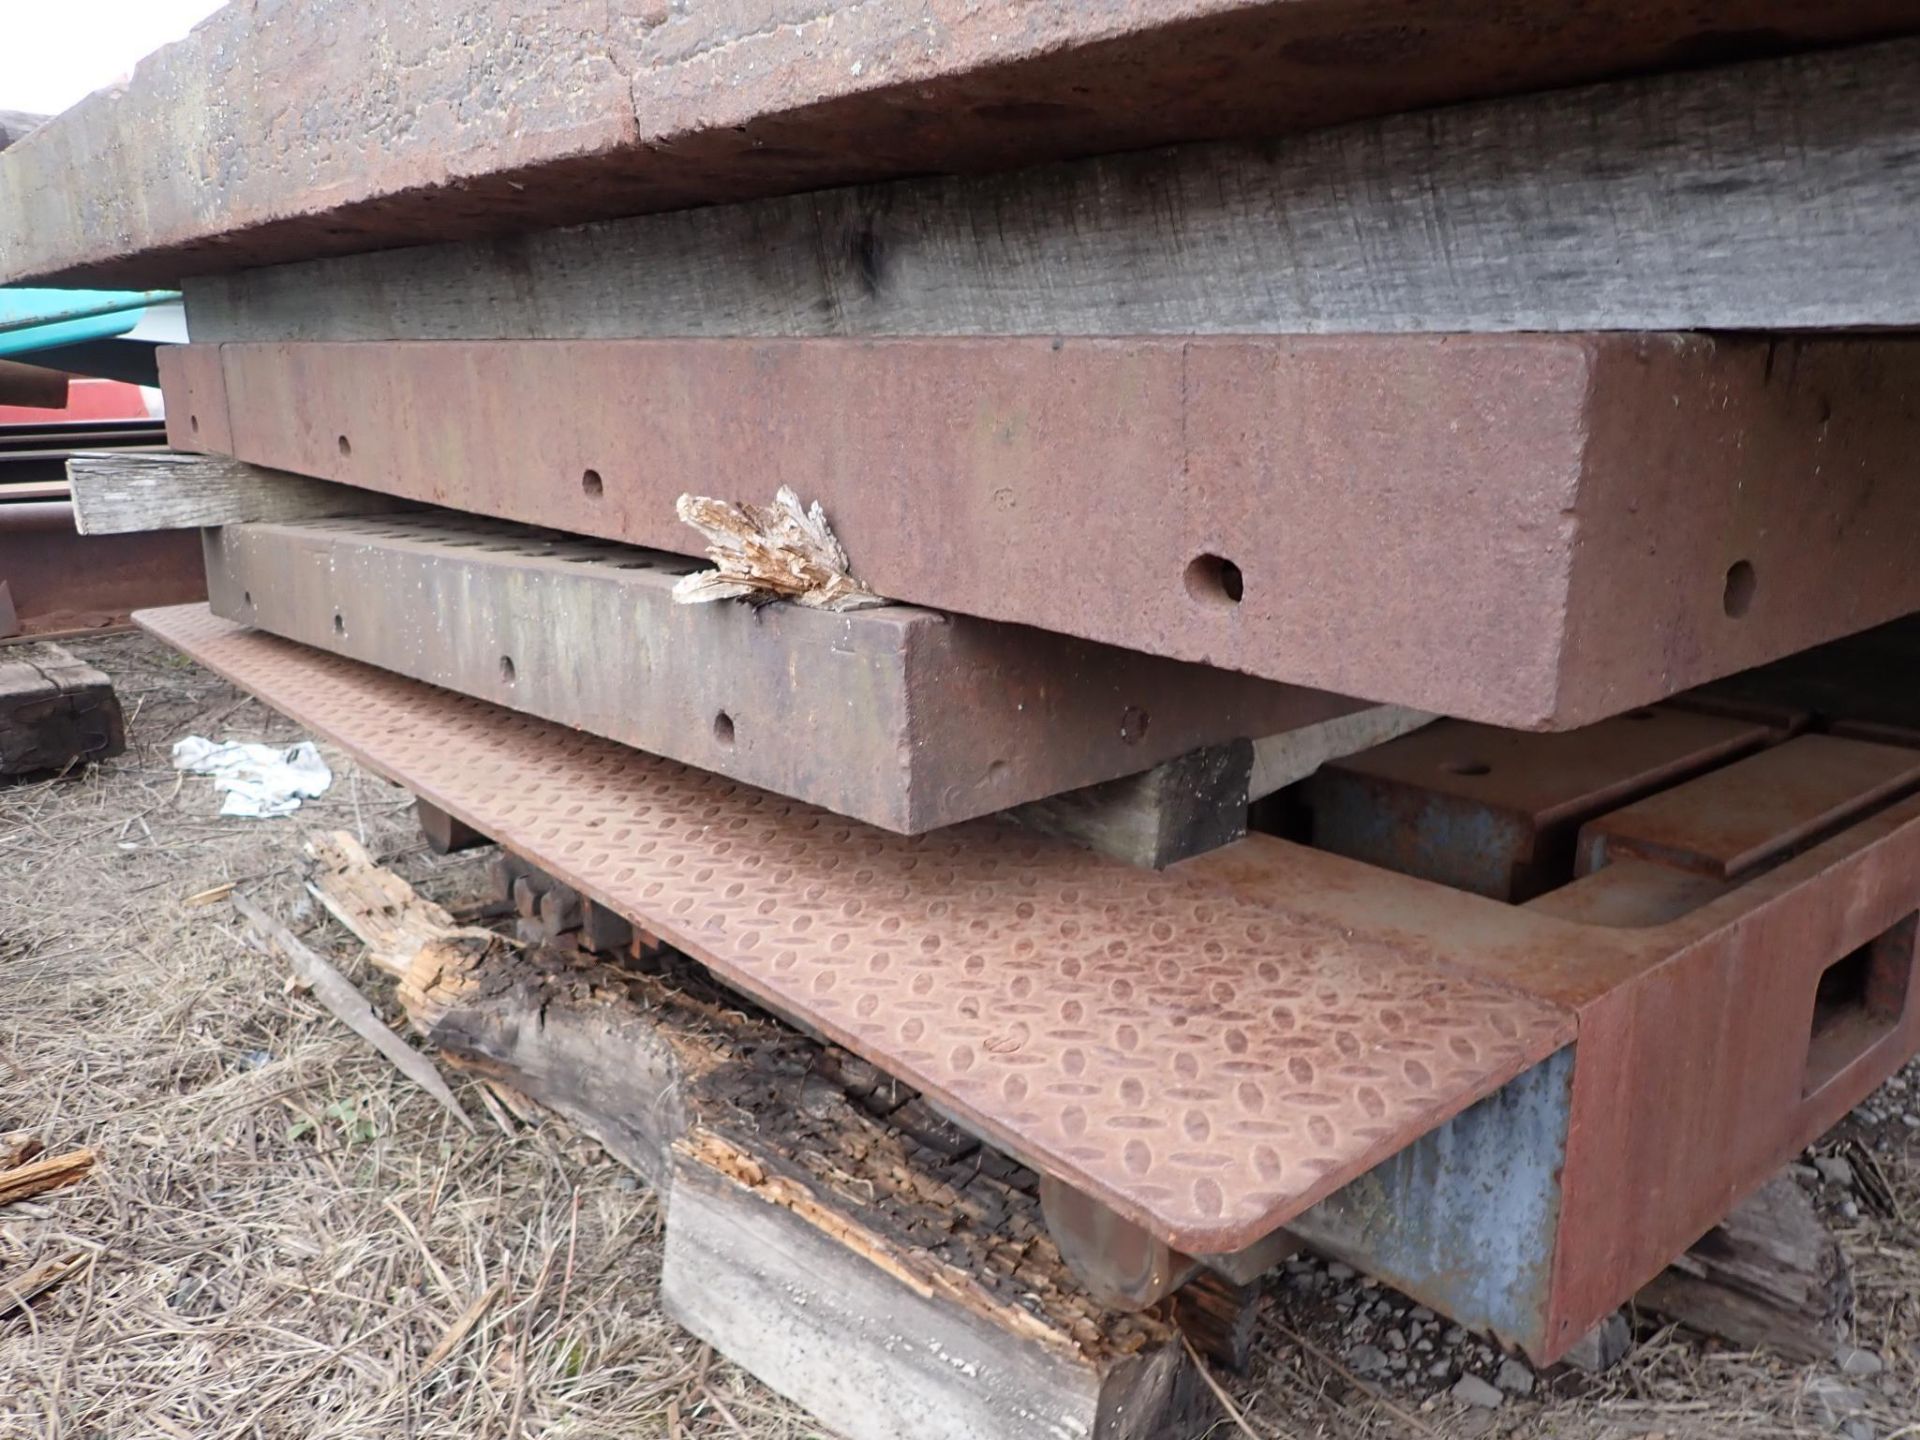 Acorn Type Welding Platen 86" x 61" x 6" high 1-7/8" square holes This item will have an additional - Image 24 of 24